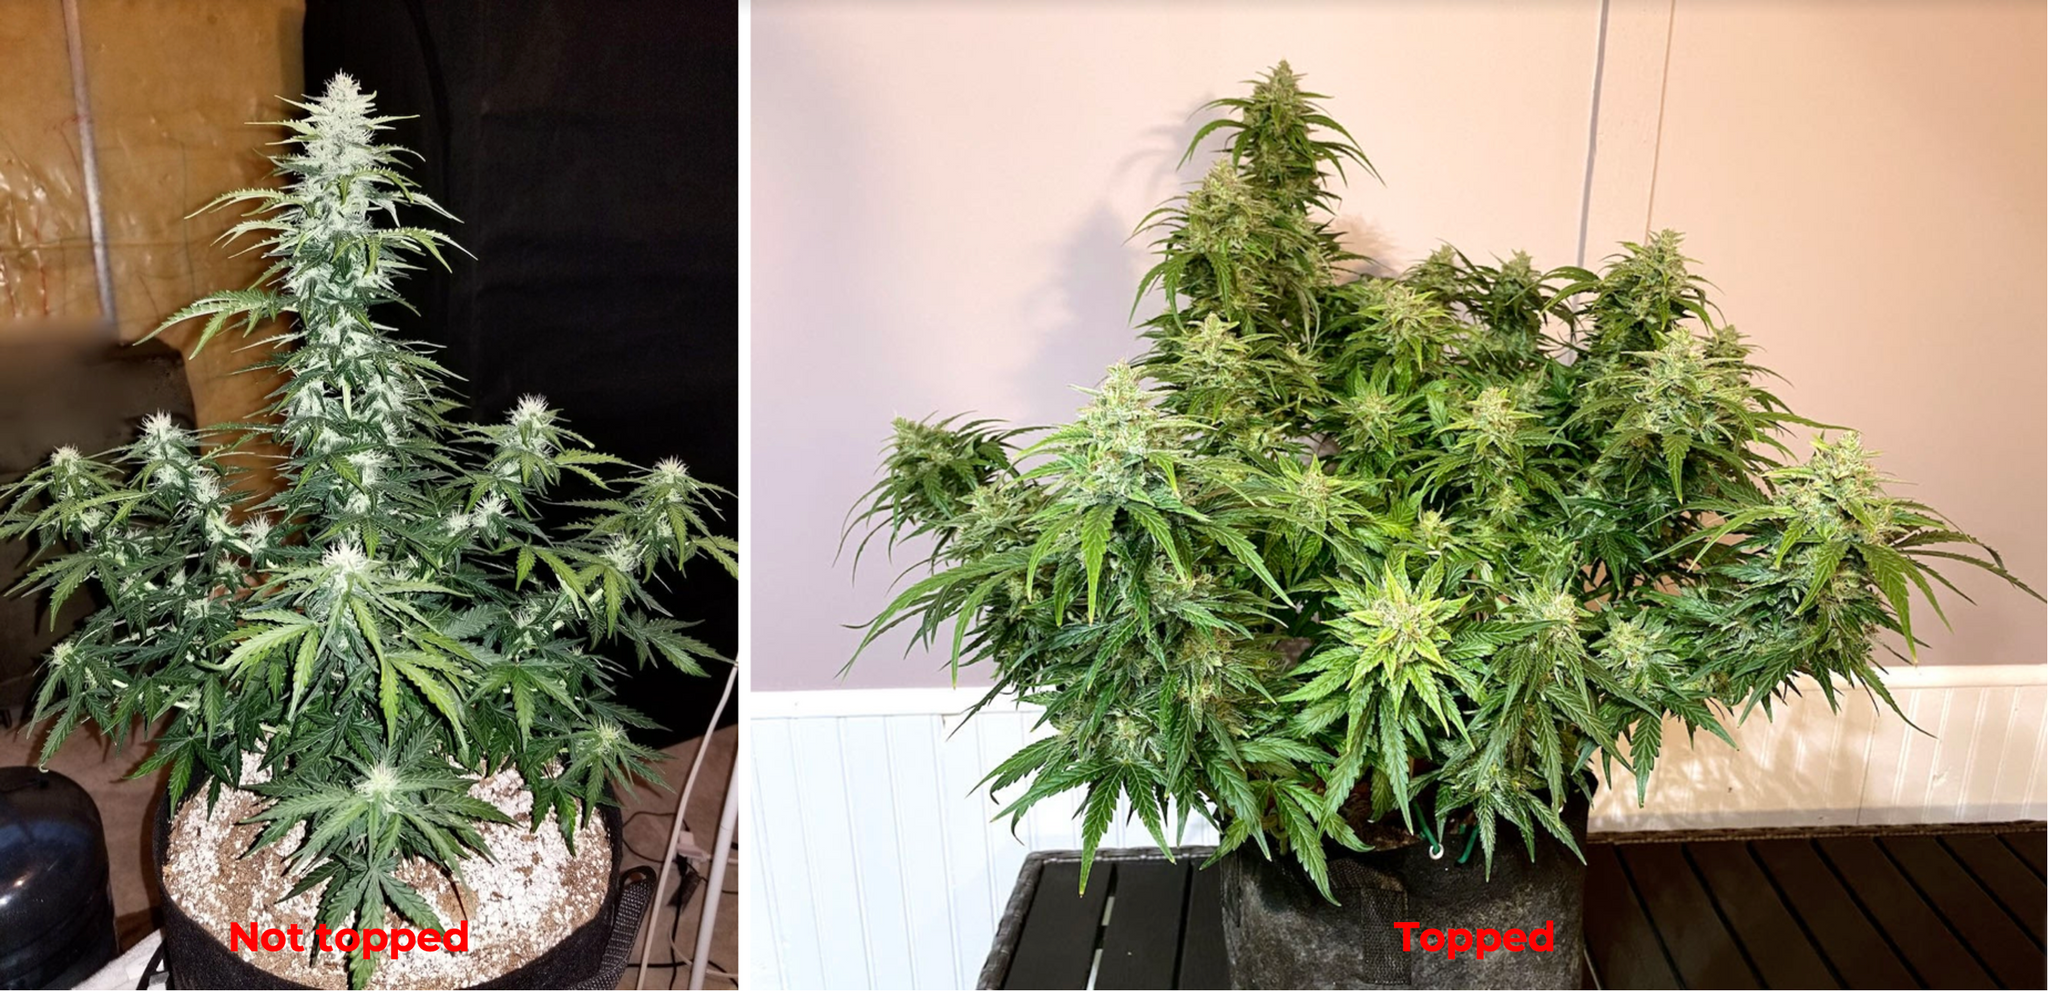 Two cannabis plants: on the left, a plant that has not been topped; on the right, a topped cannabis plant.